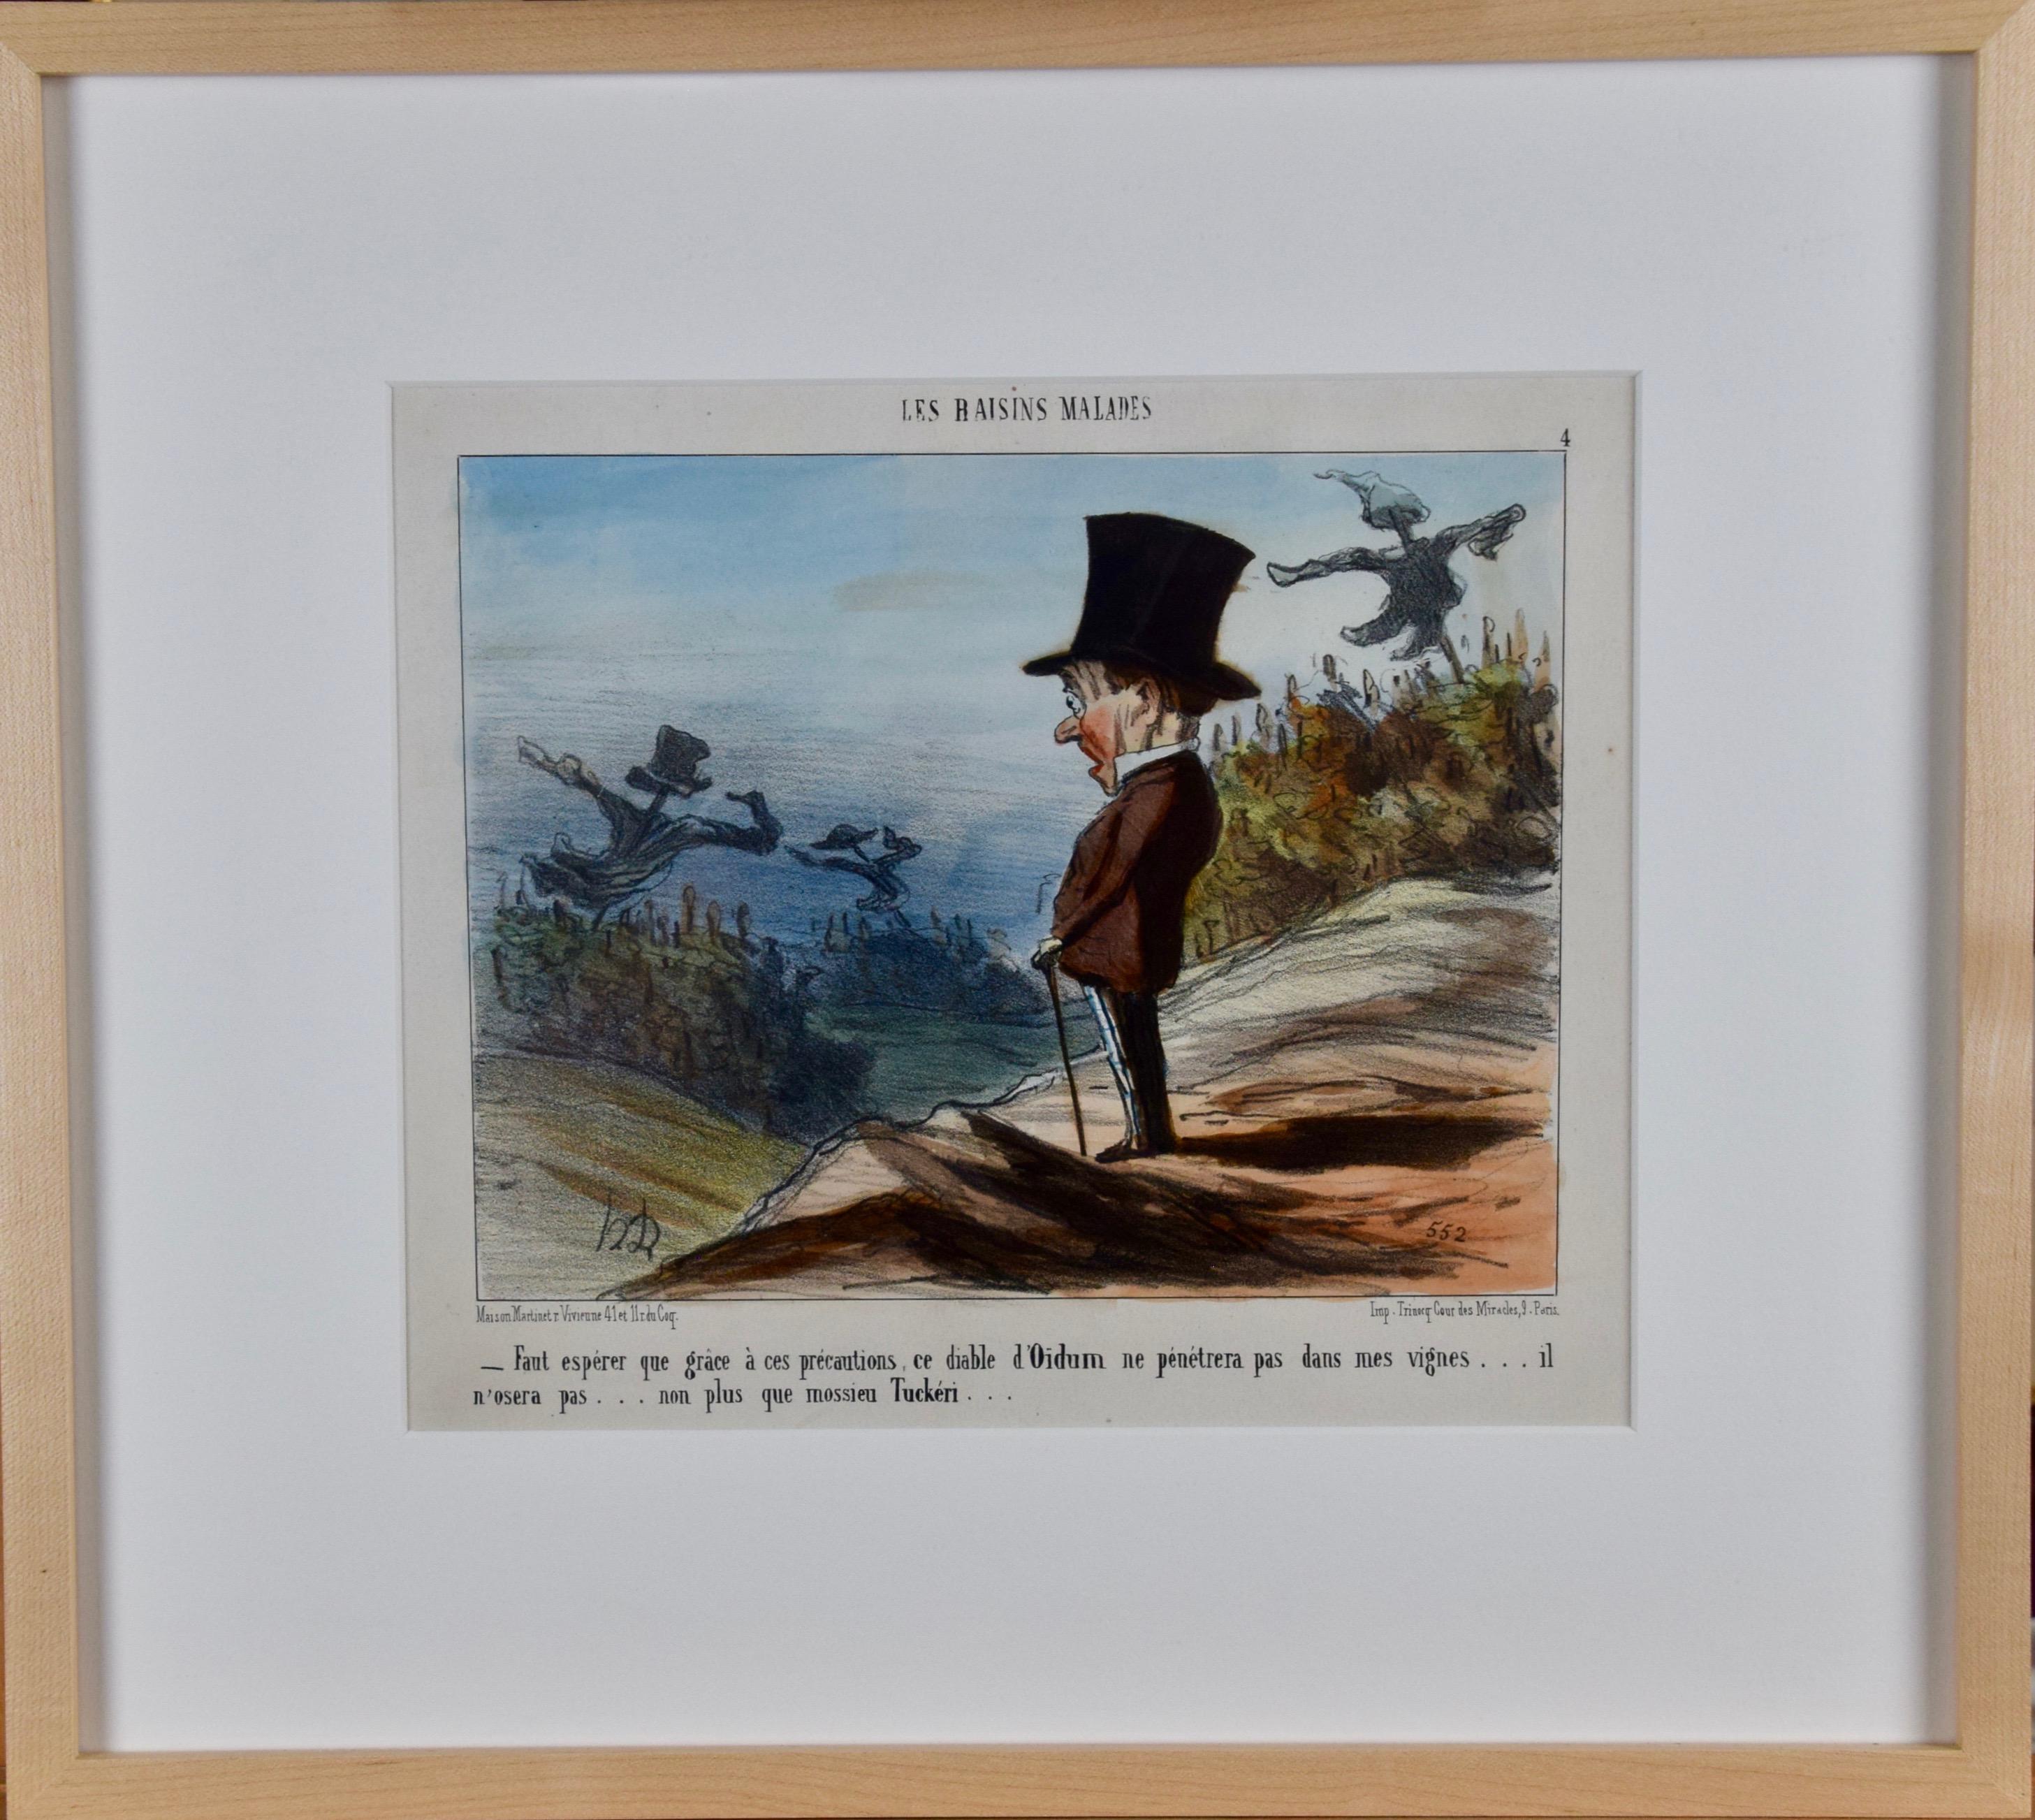 Honoré Daumier Landscape Print - Daumier Colored Lithographic Satire of a Man Concerned for His Vineyard and Wine